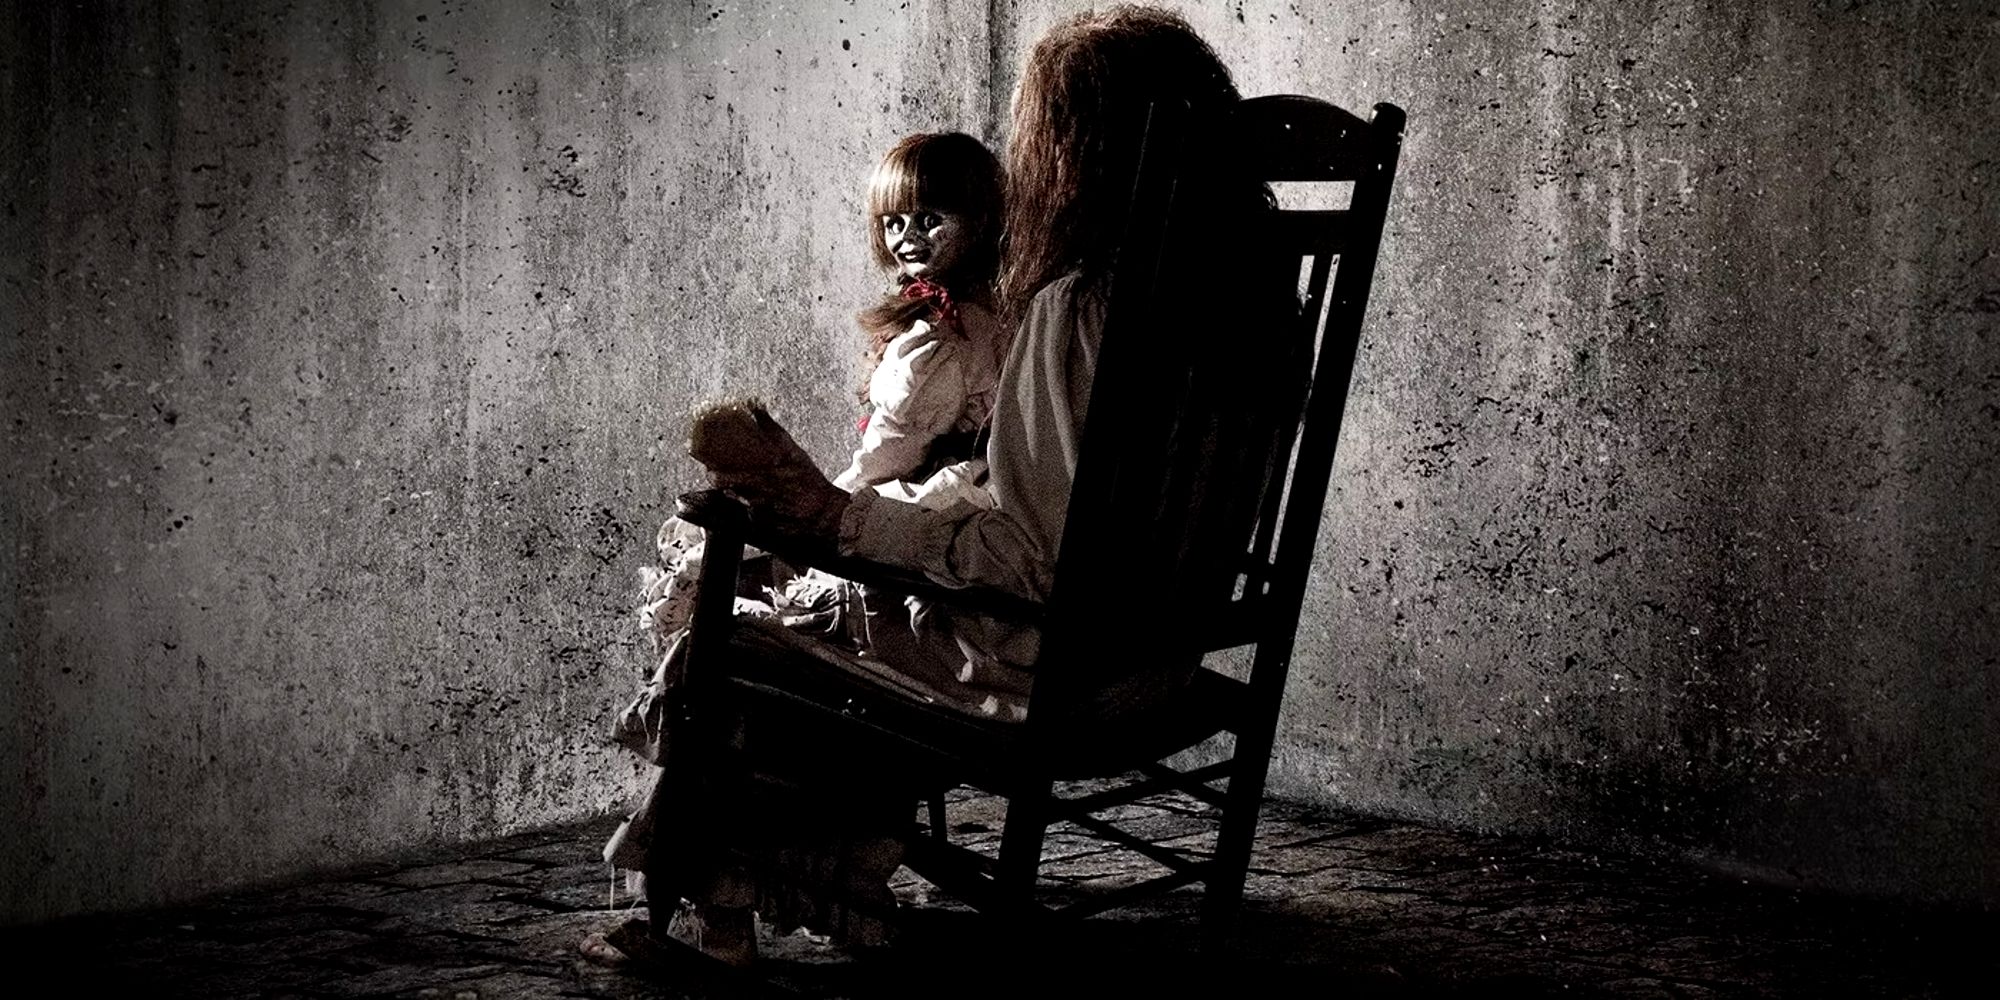 The Conjuring Horror Movie Poster